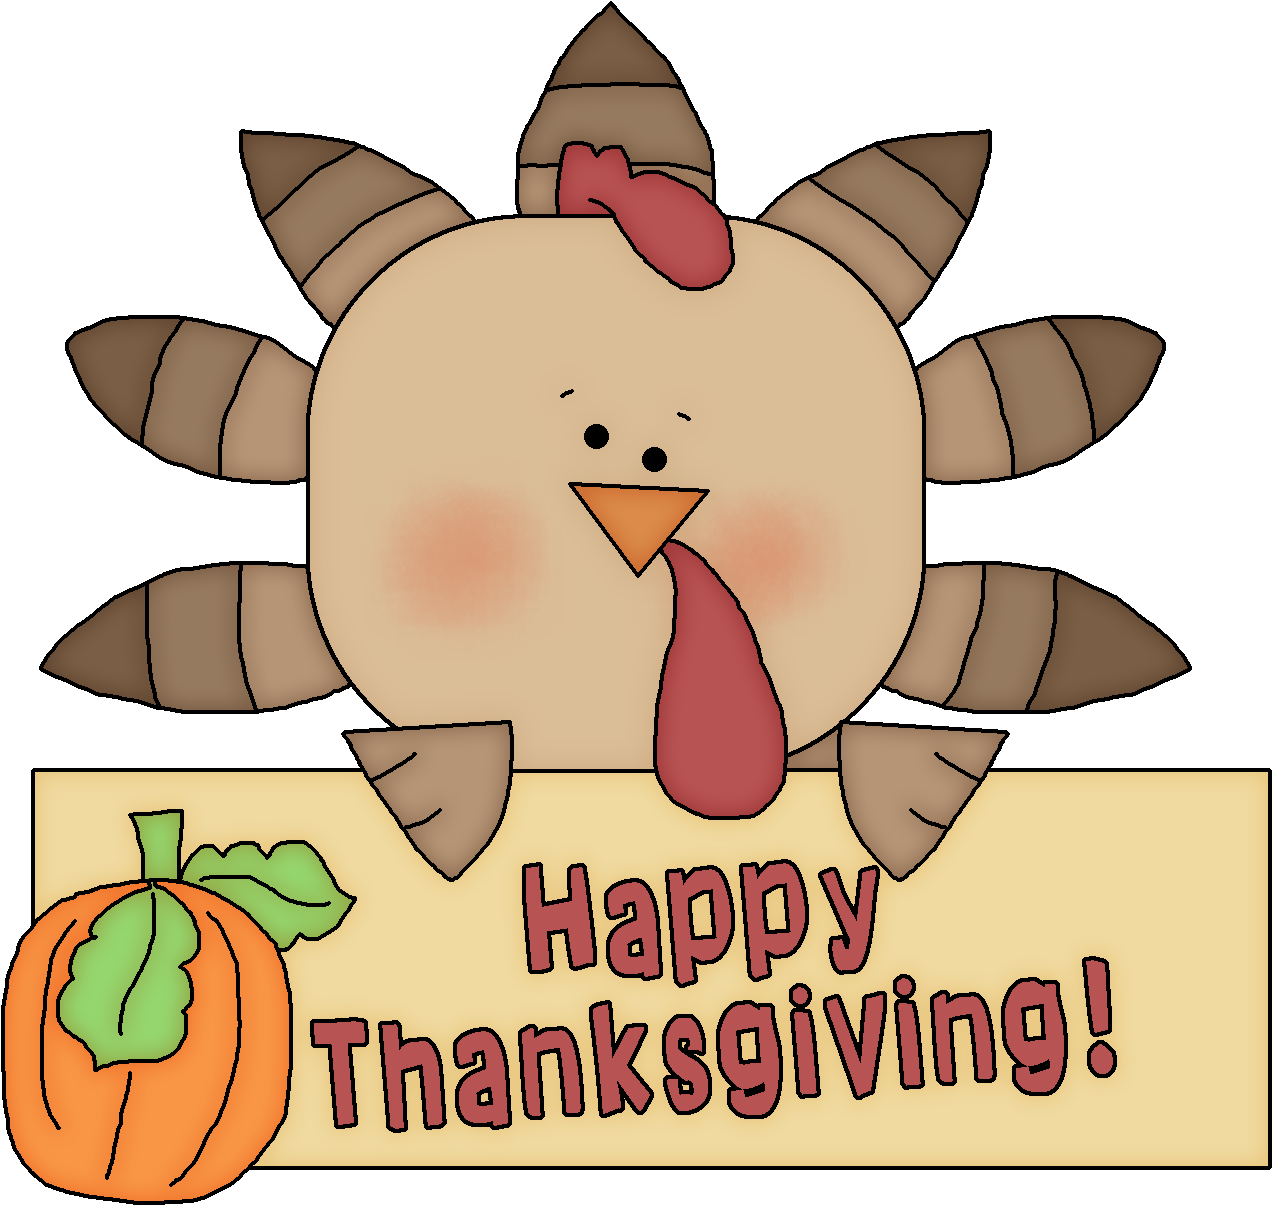 Tuesday, November 1, - Happy Thanksgiving Greeting Cards (1311x1229)